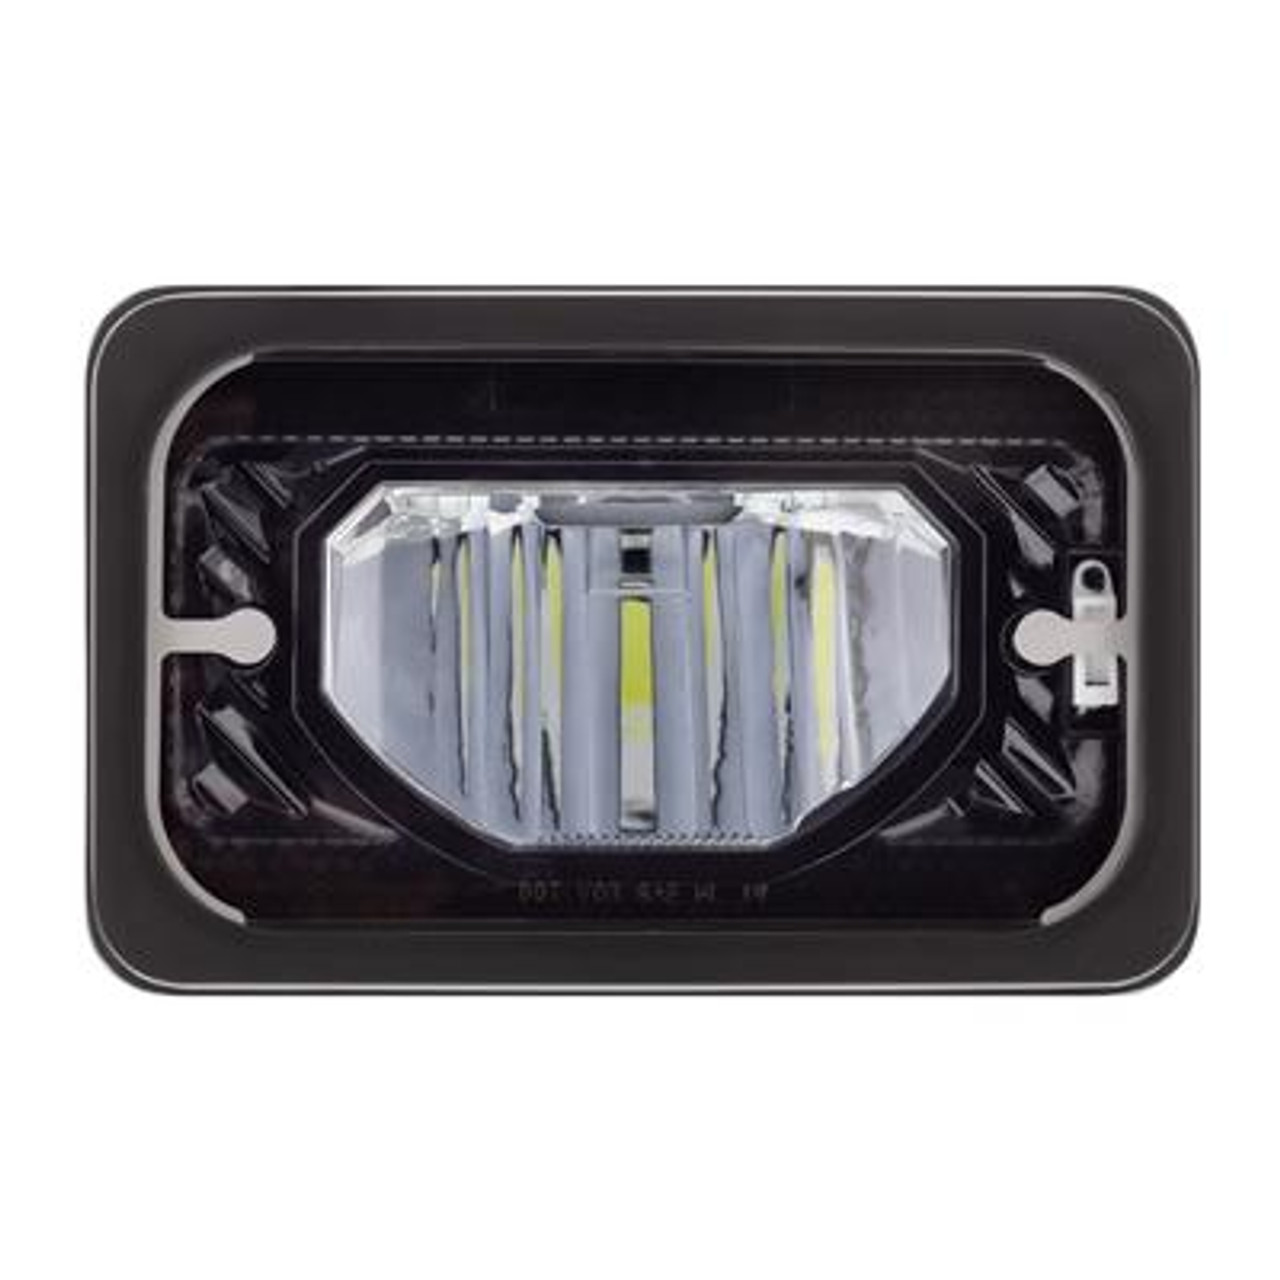 As one of the largest manufacturers of aftermarket headlights and accessories, United Pacific is here to provide nothing but the best components. From full headlight assemblies, bulbs, turn signals, to visors and shields, UP has everything you need.